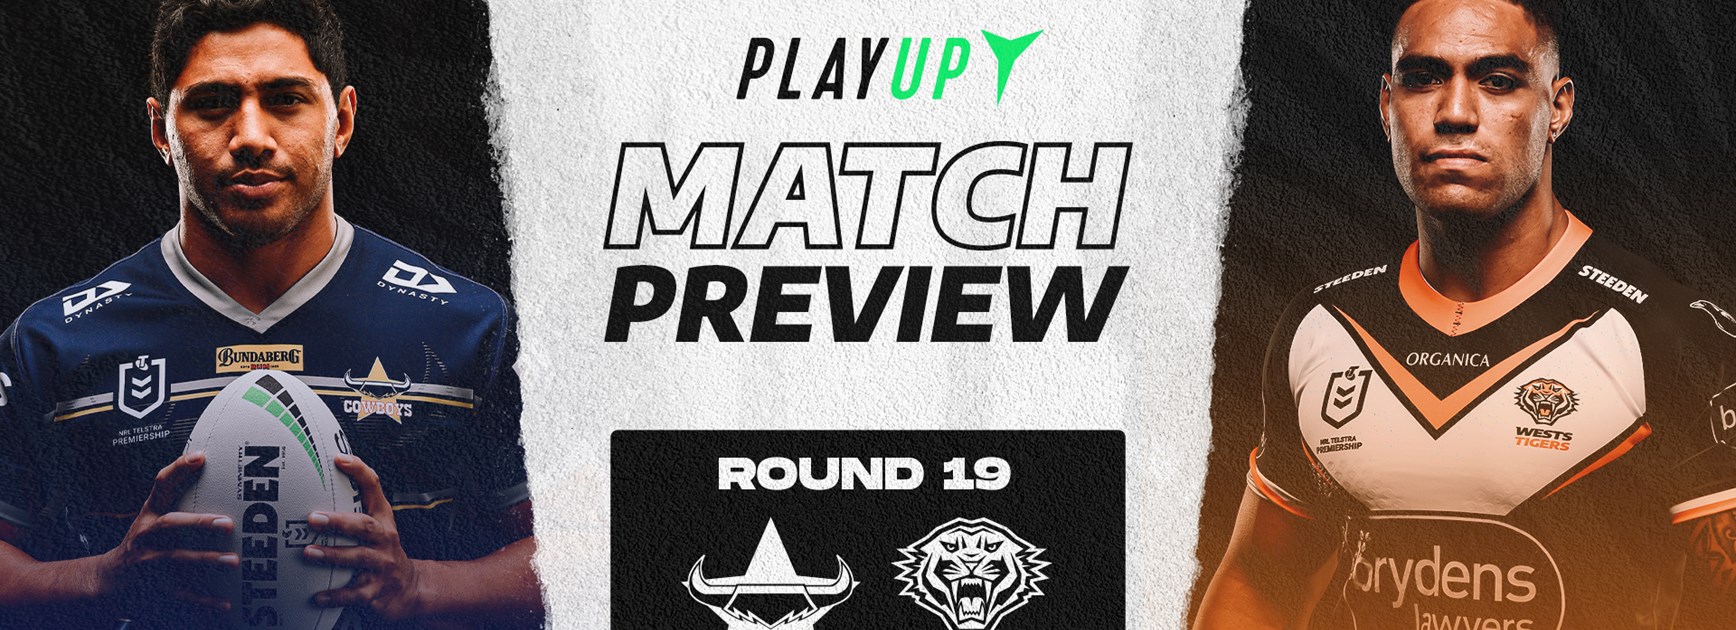 Match Preview: Round 19 vs North Queensland Cowboys